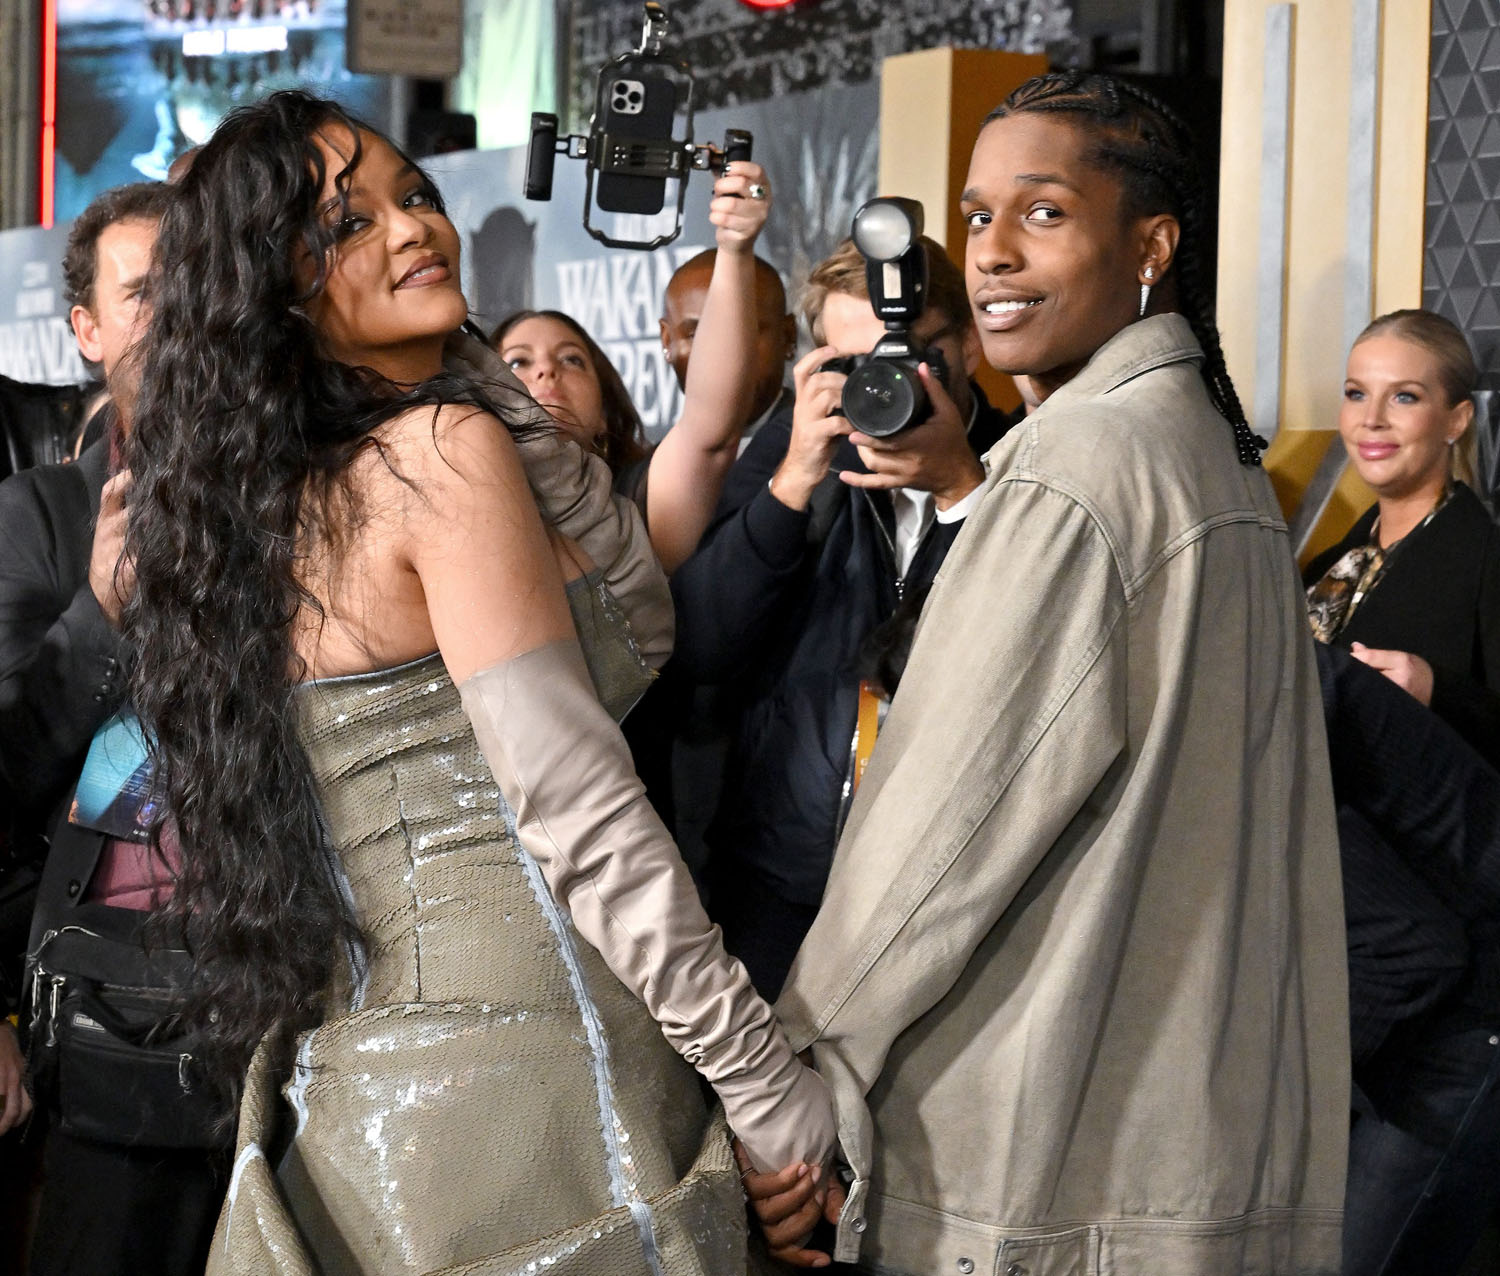 Rihanna and A$AP Rocky Coordinate in Monochrome Sets for the